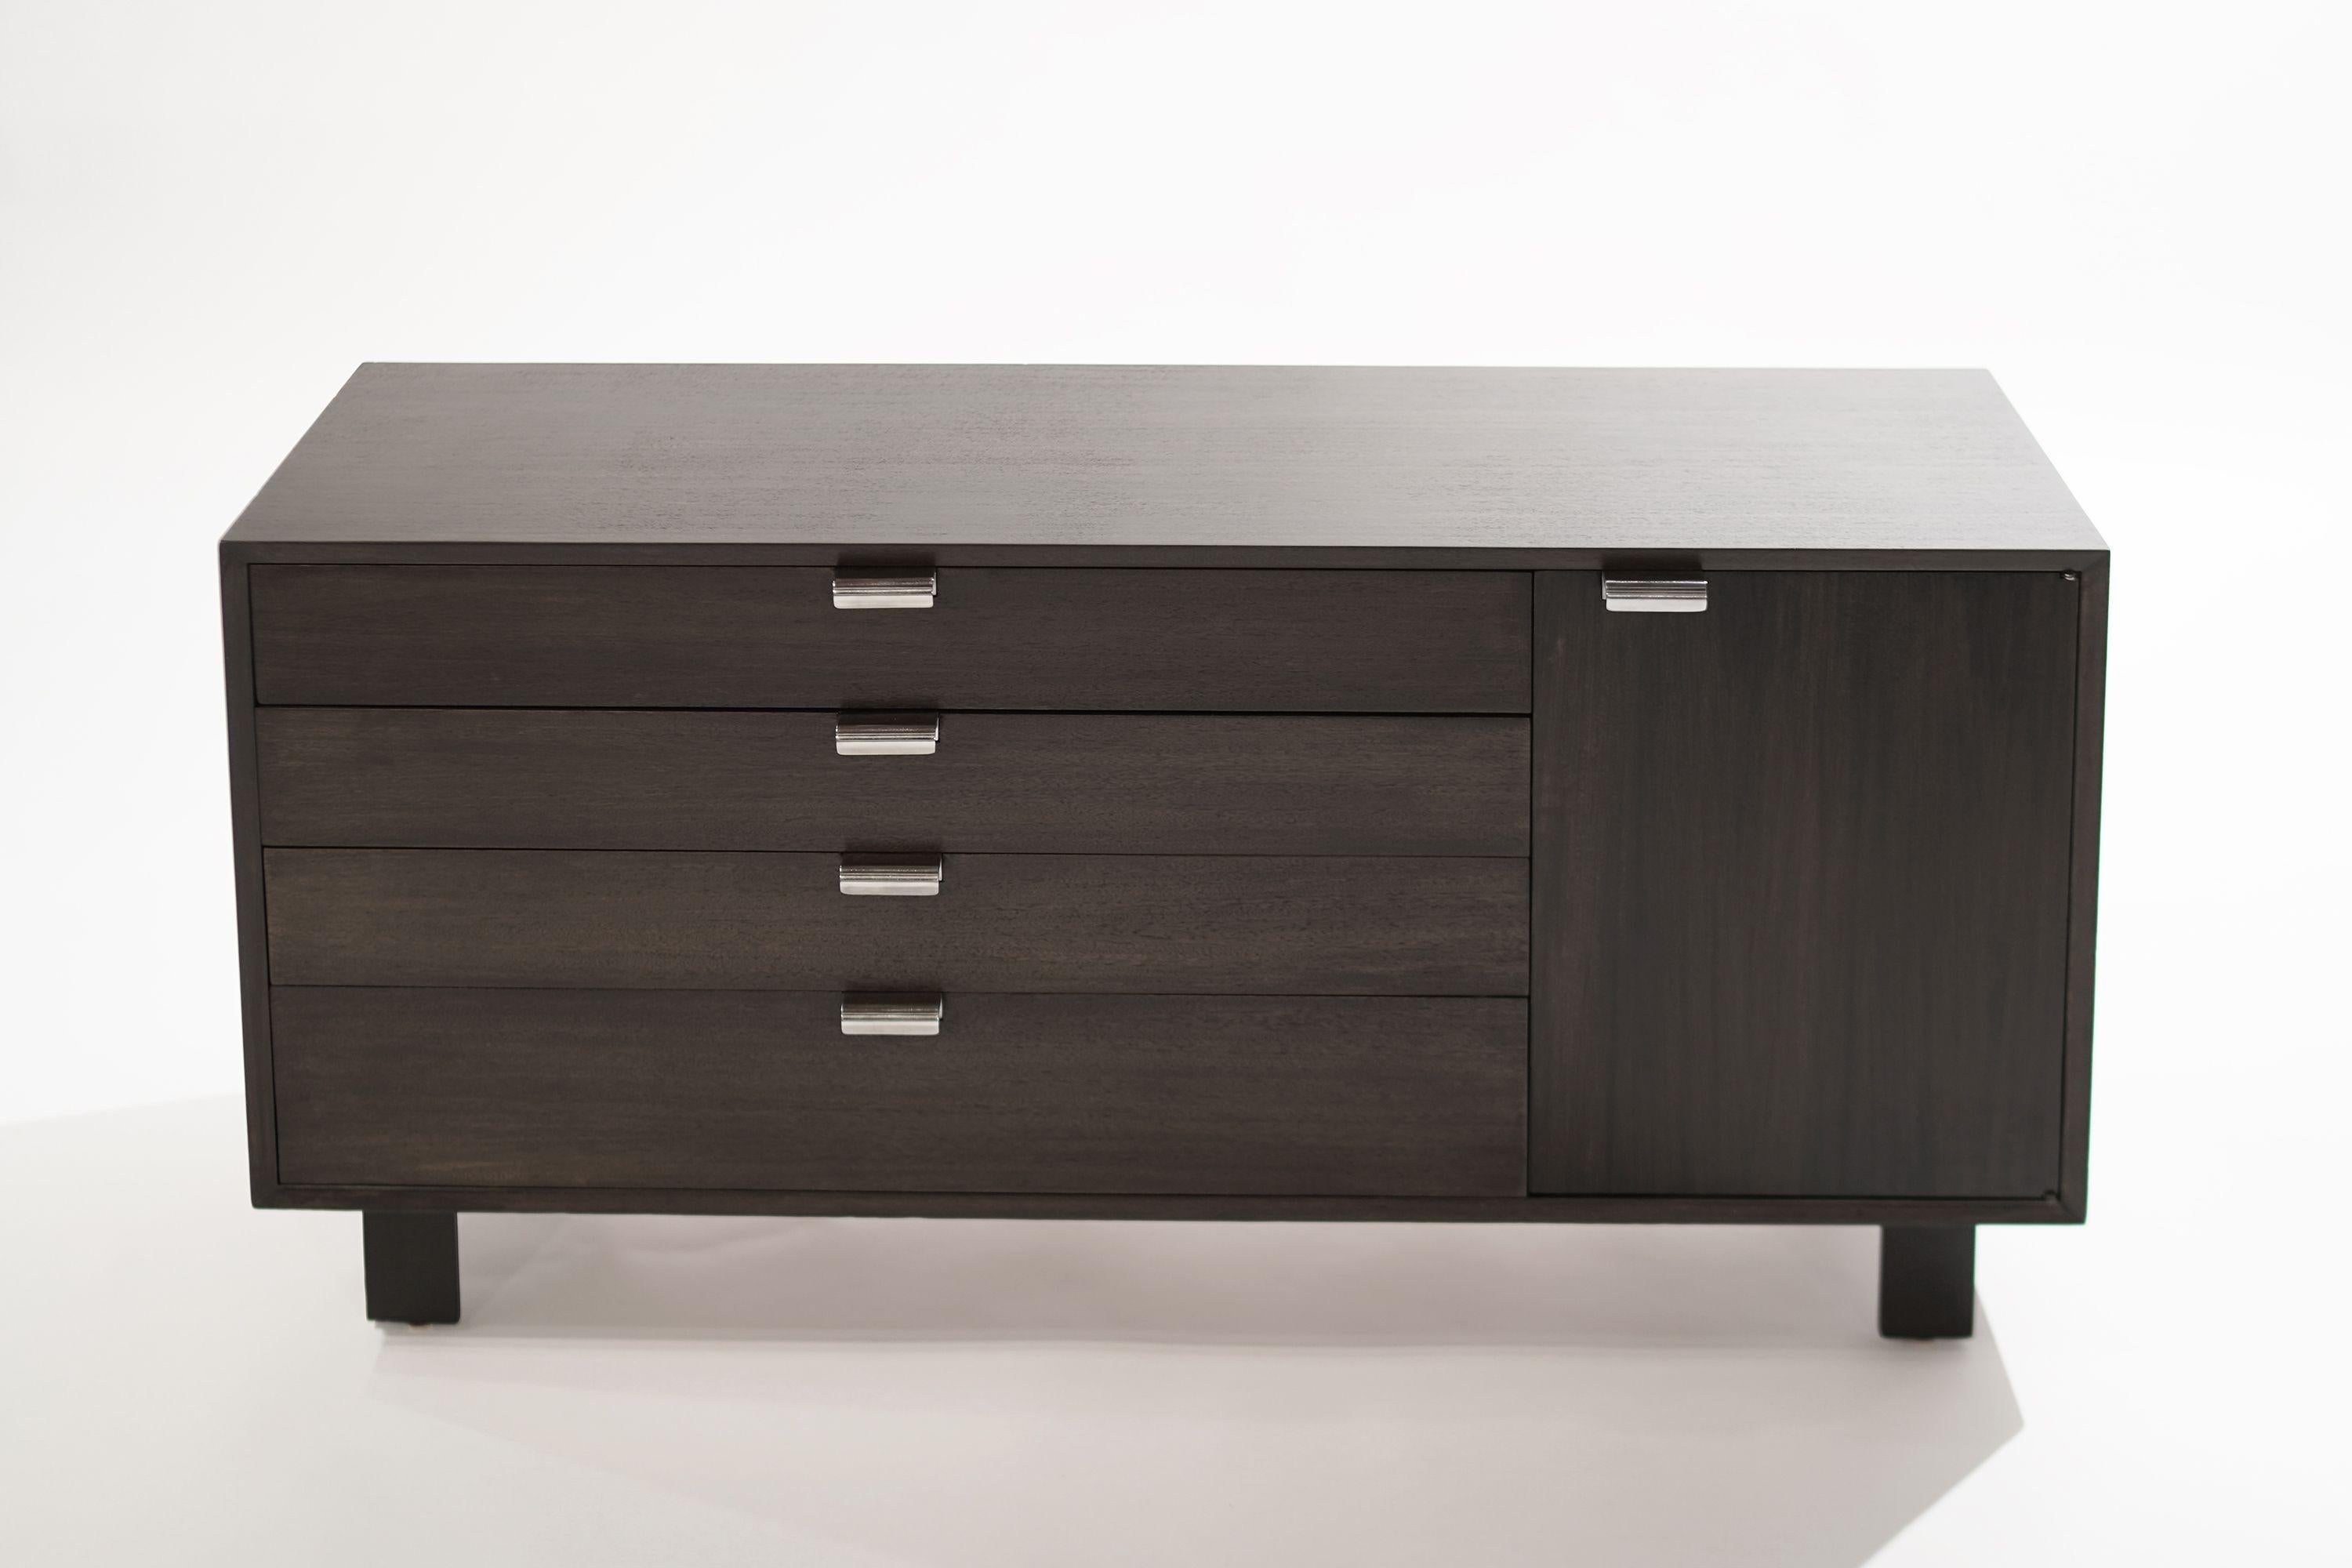 From Nelson's versatile line of case goods for Herman Miller, this model 4712 in mahogany from the Basic Cabinet Group features four drawers, the bottom one being larger. The door opens up to reveal dual adjustable shelves. Nickel hardware newly